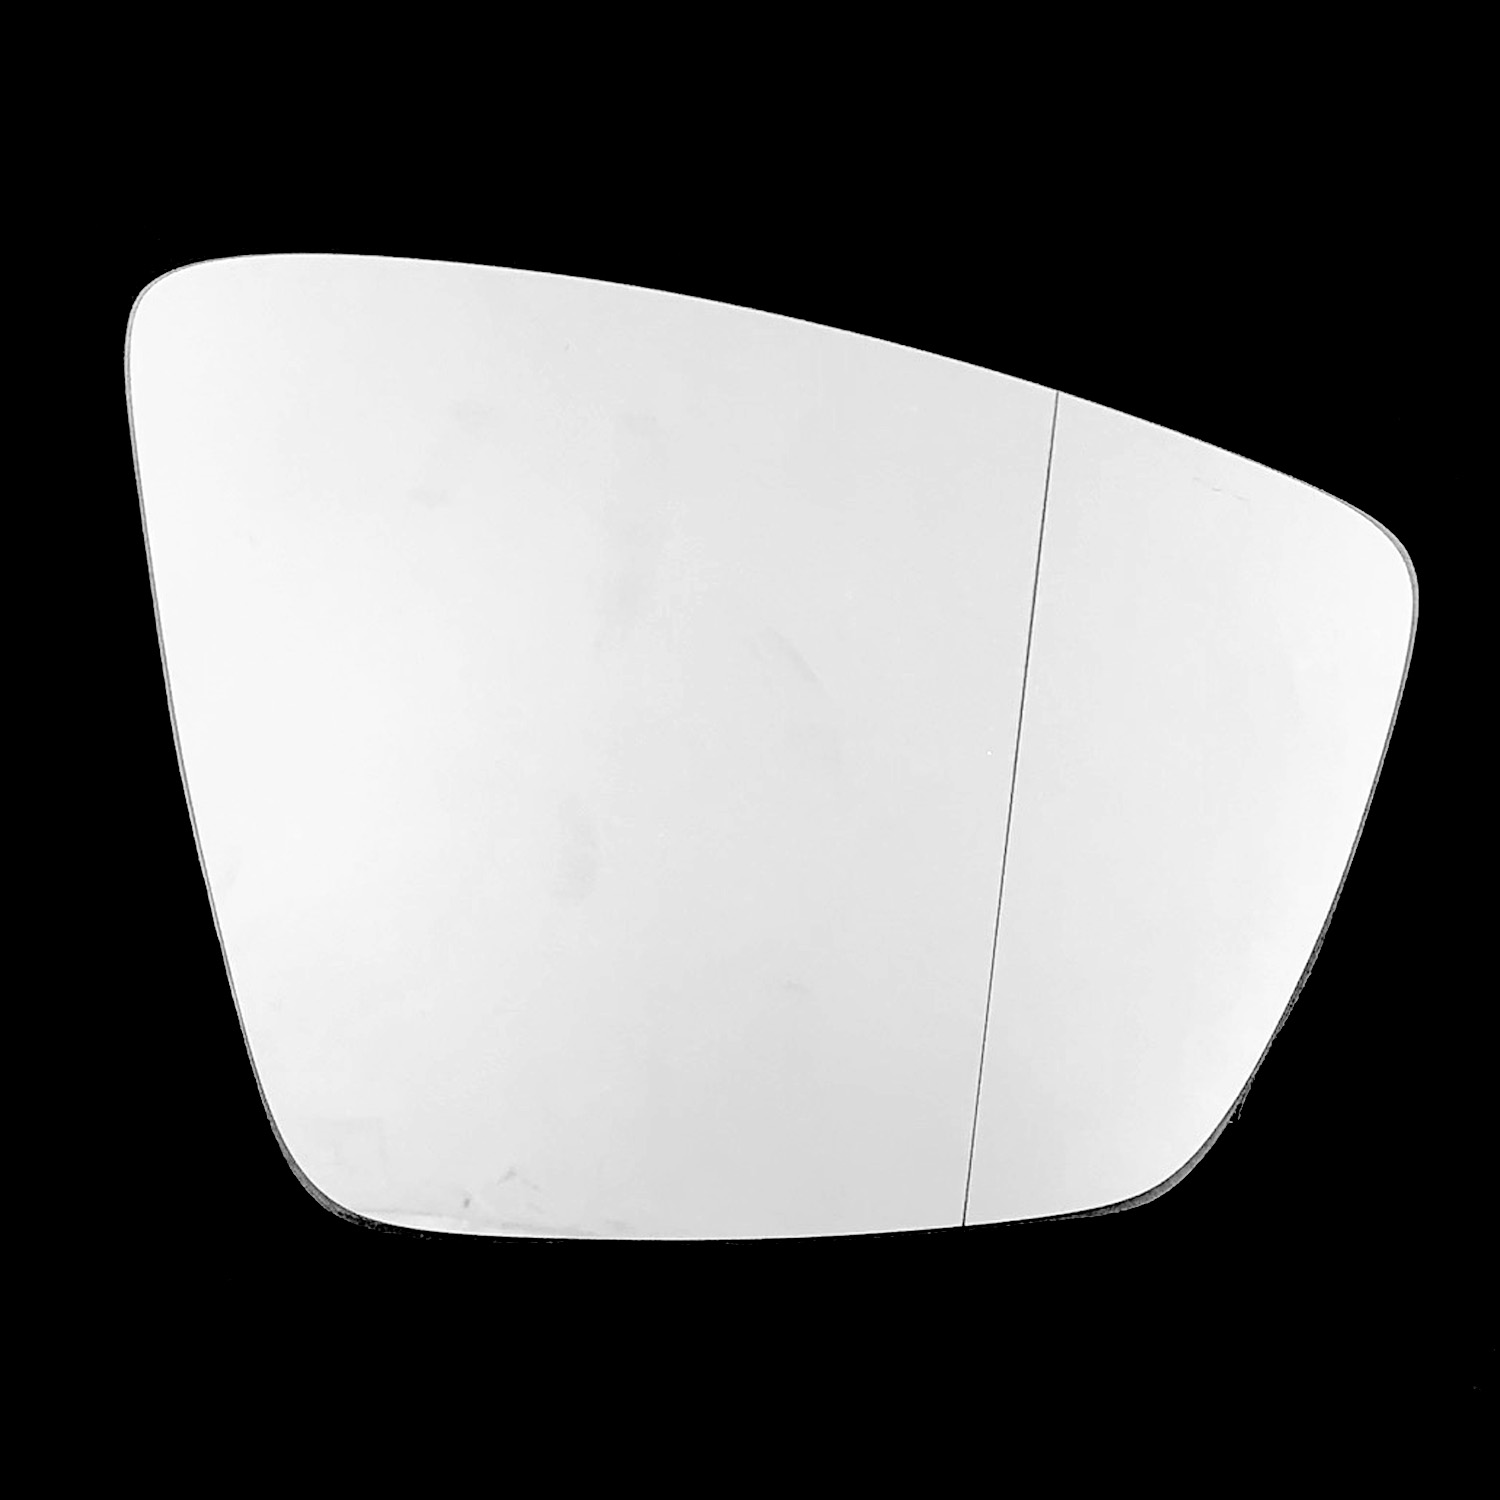 Skoda Karoq Wing Mirror Glass RIGHT HAND ( UK Driver Side ) 2017 to 2020 – Wide Angle Wing Mirror